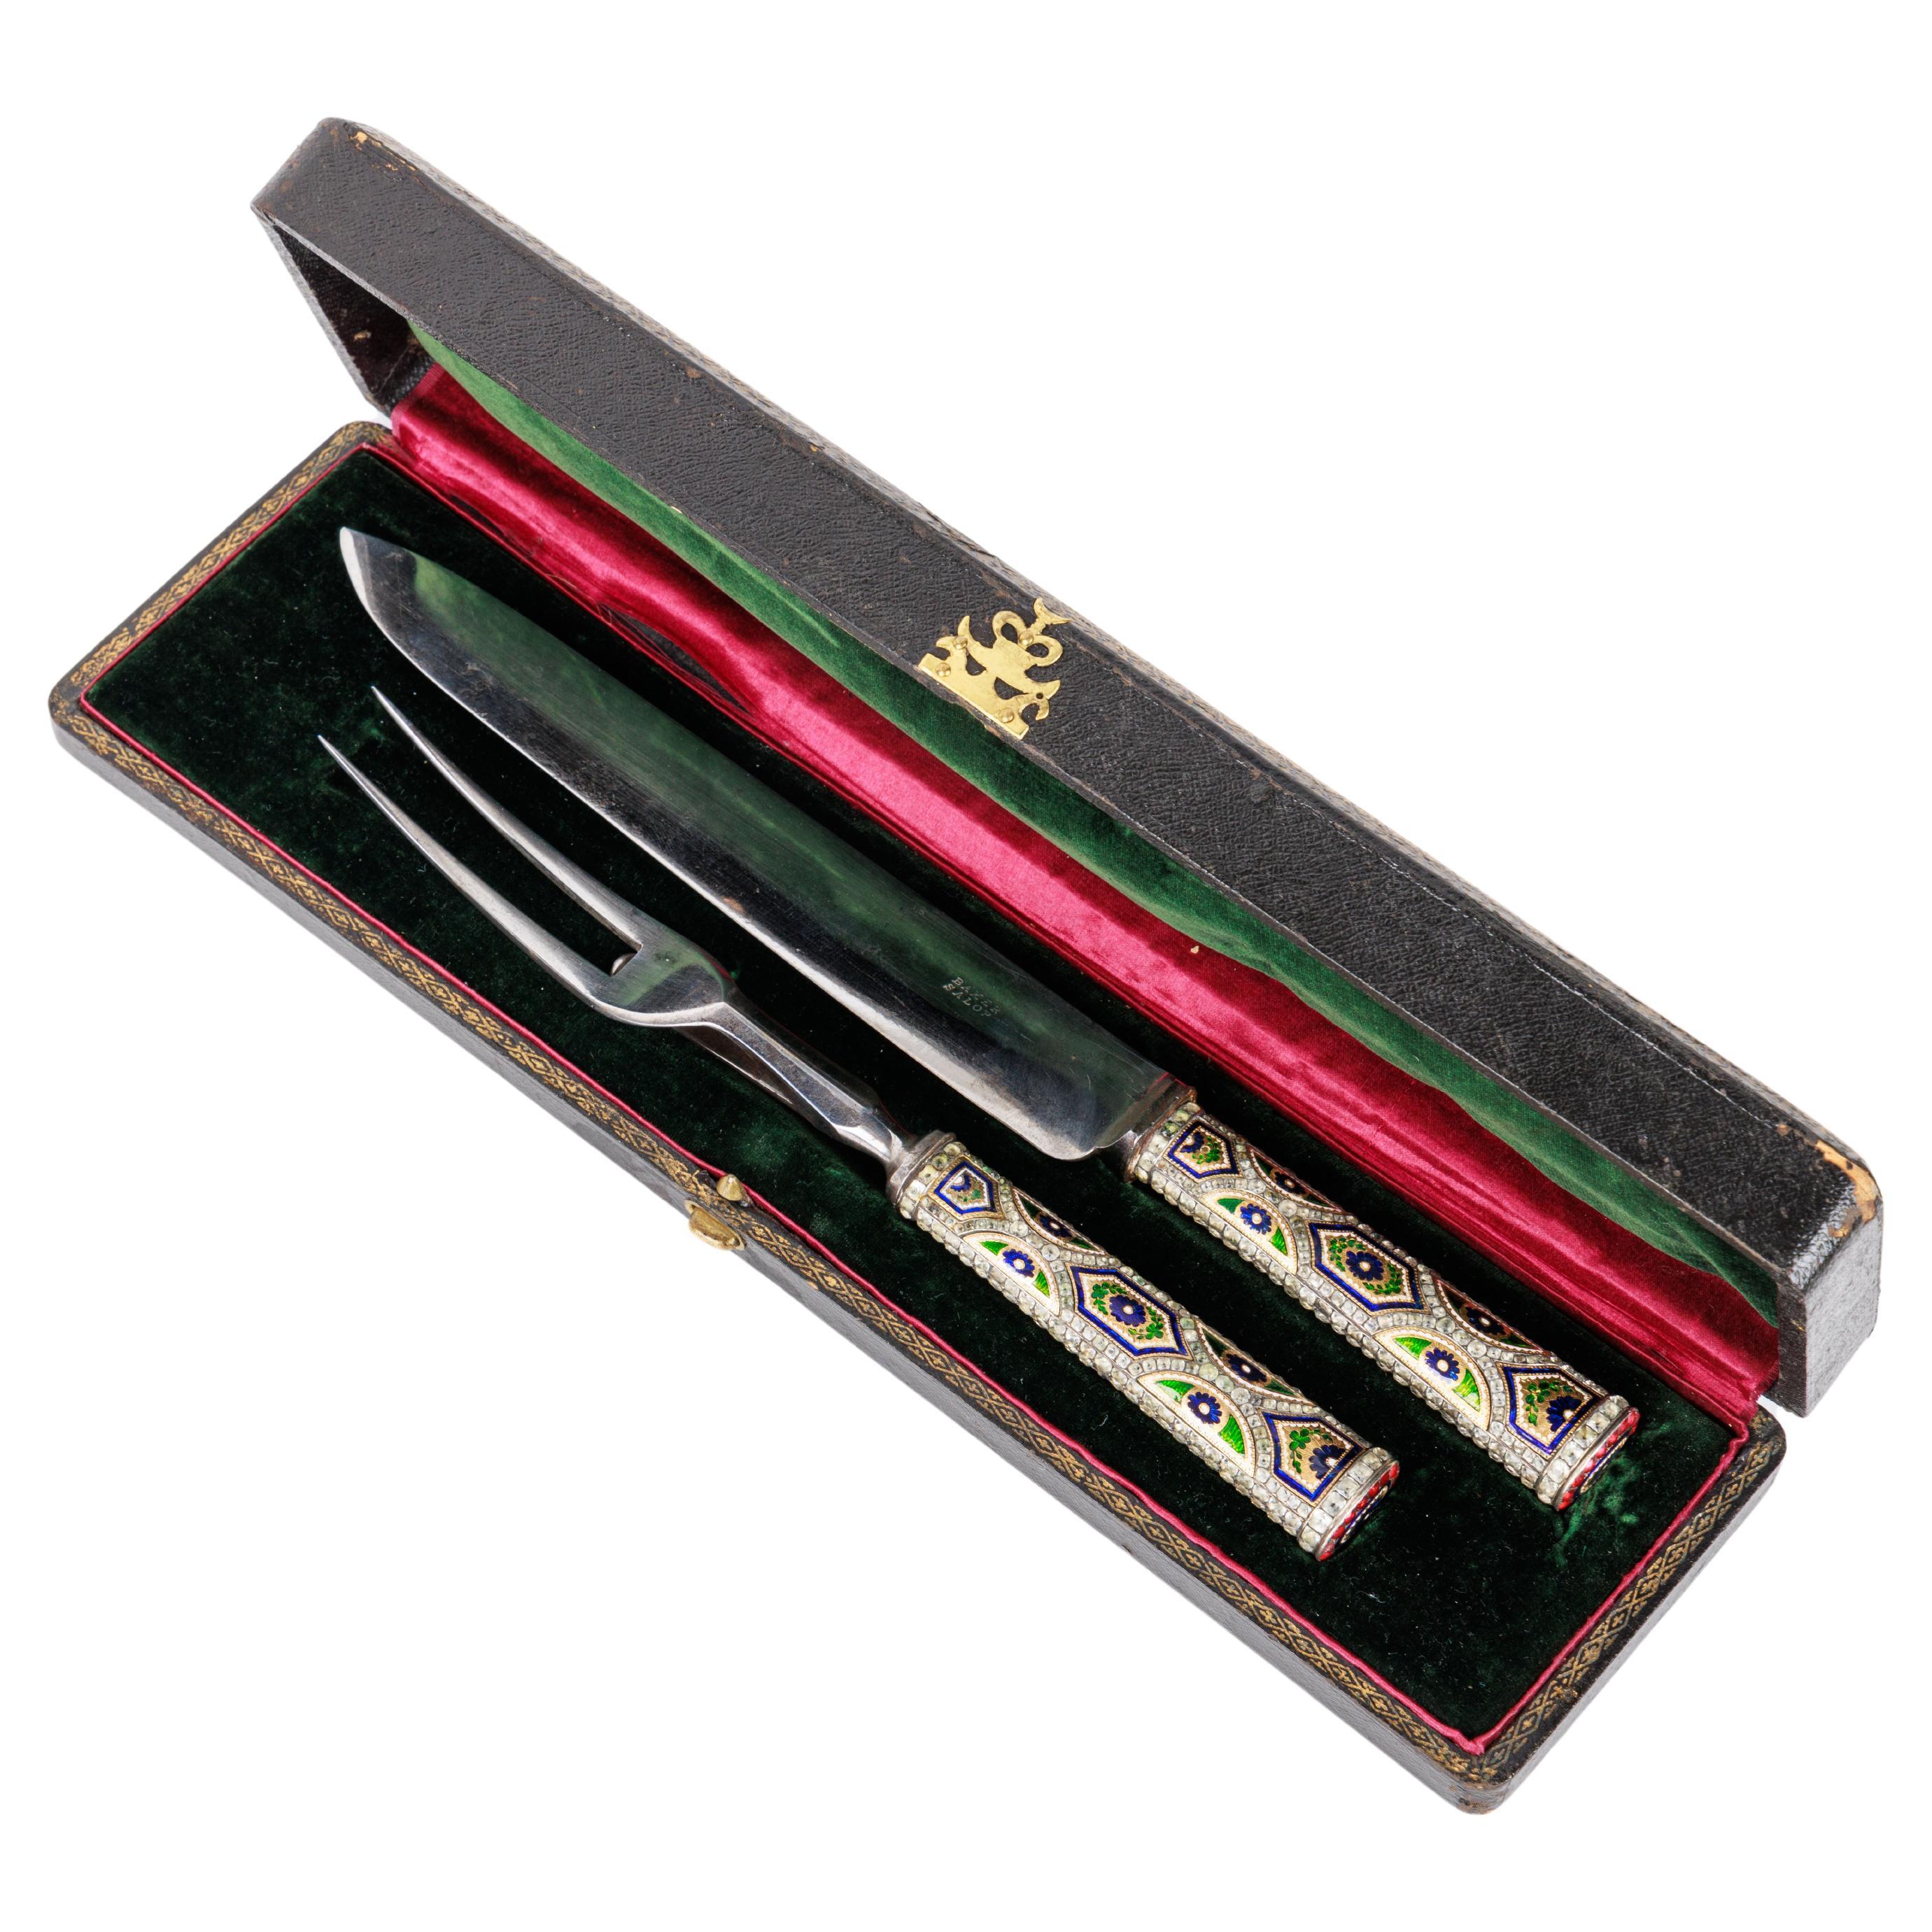 A Rare Gold, Enamel and Jewelled Cutting / Carving Service.

The handles 18th century, Switzerland and the blades 19th century, England.

Comprising a knife and a fork, the handles decorated with blue, green and white gold enamel panels of flowers